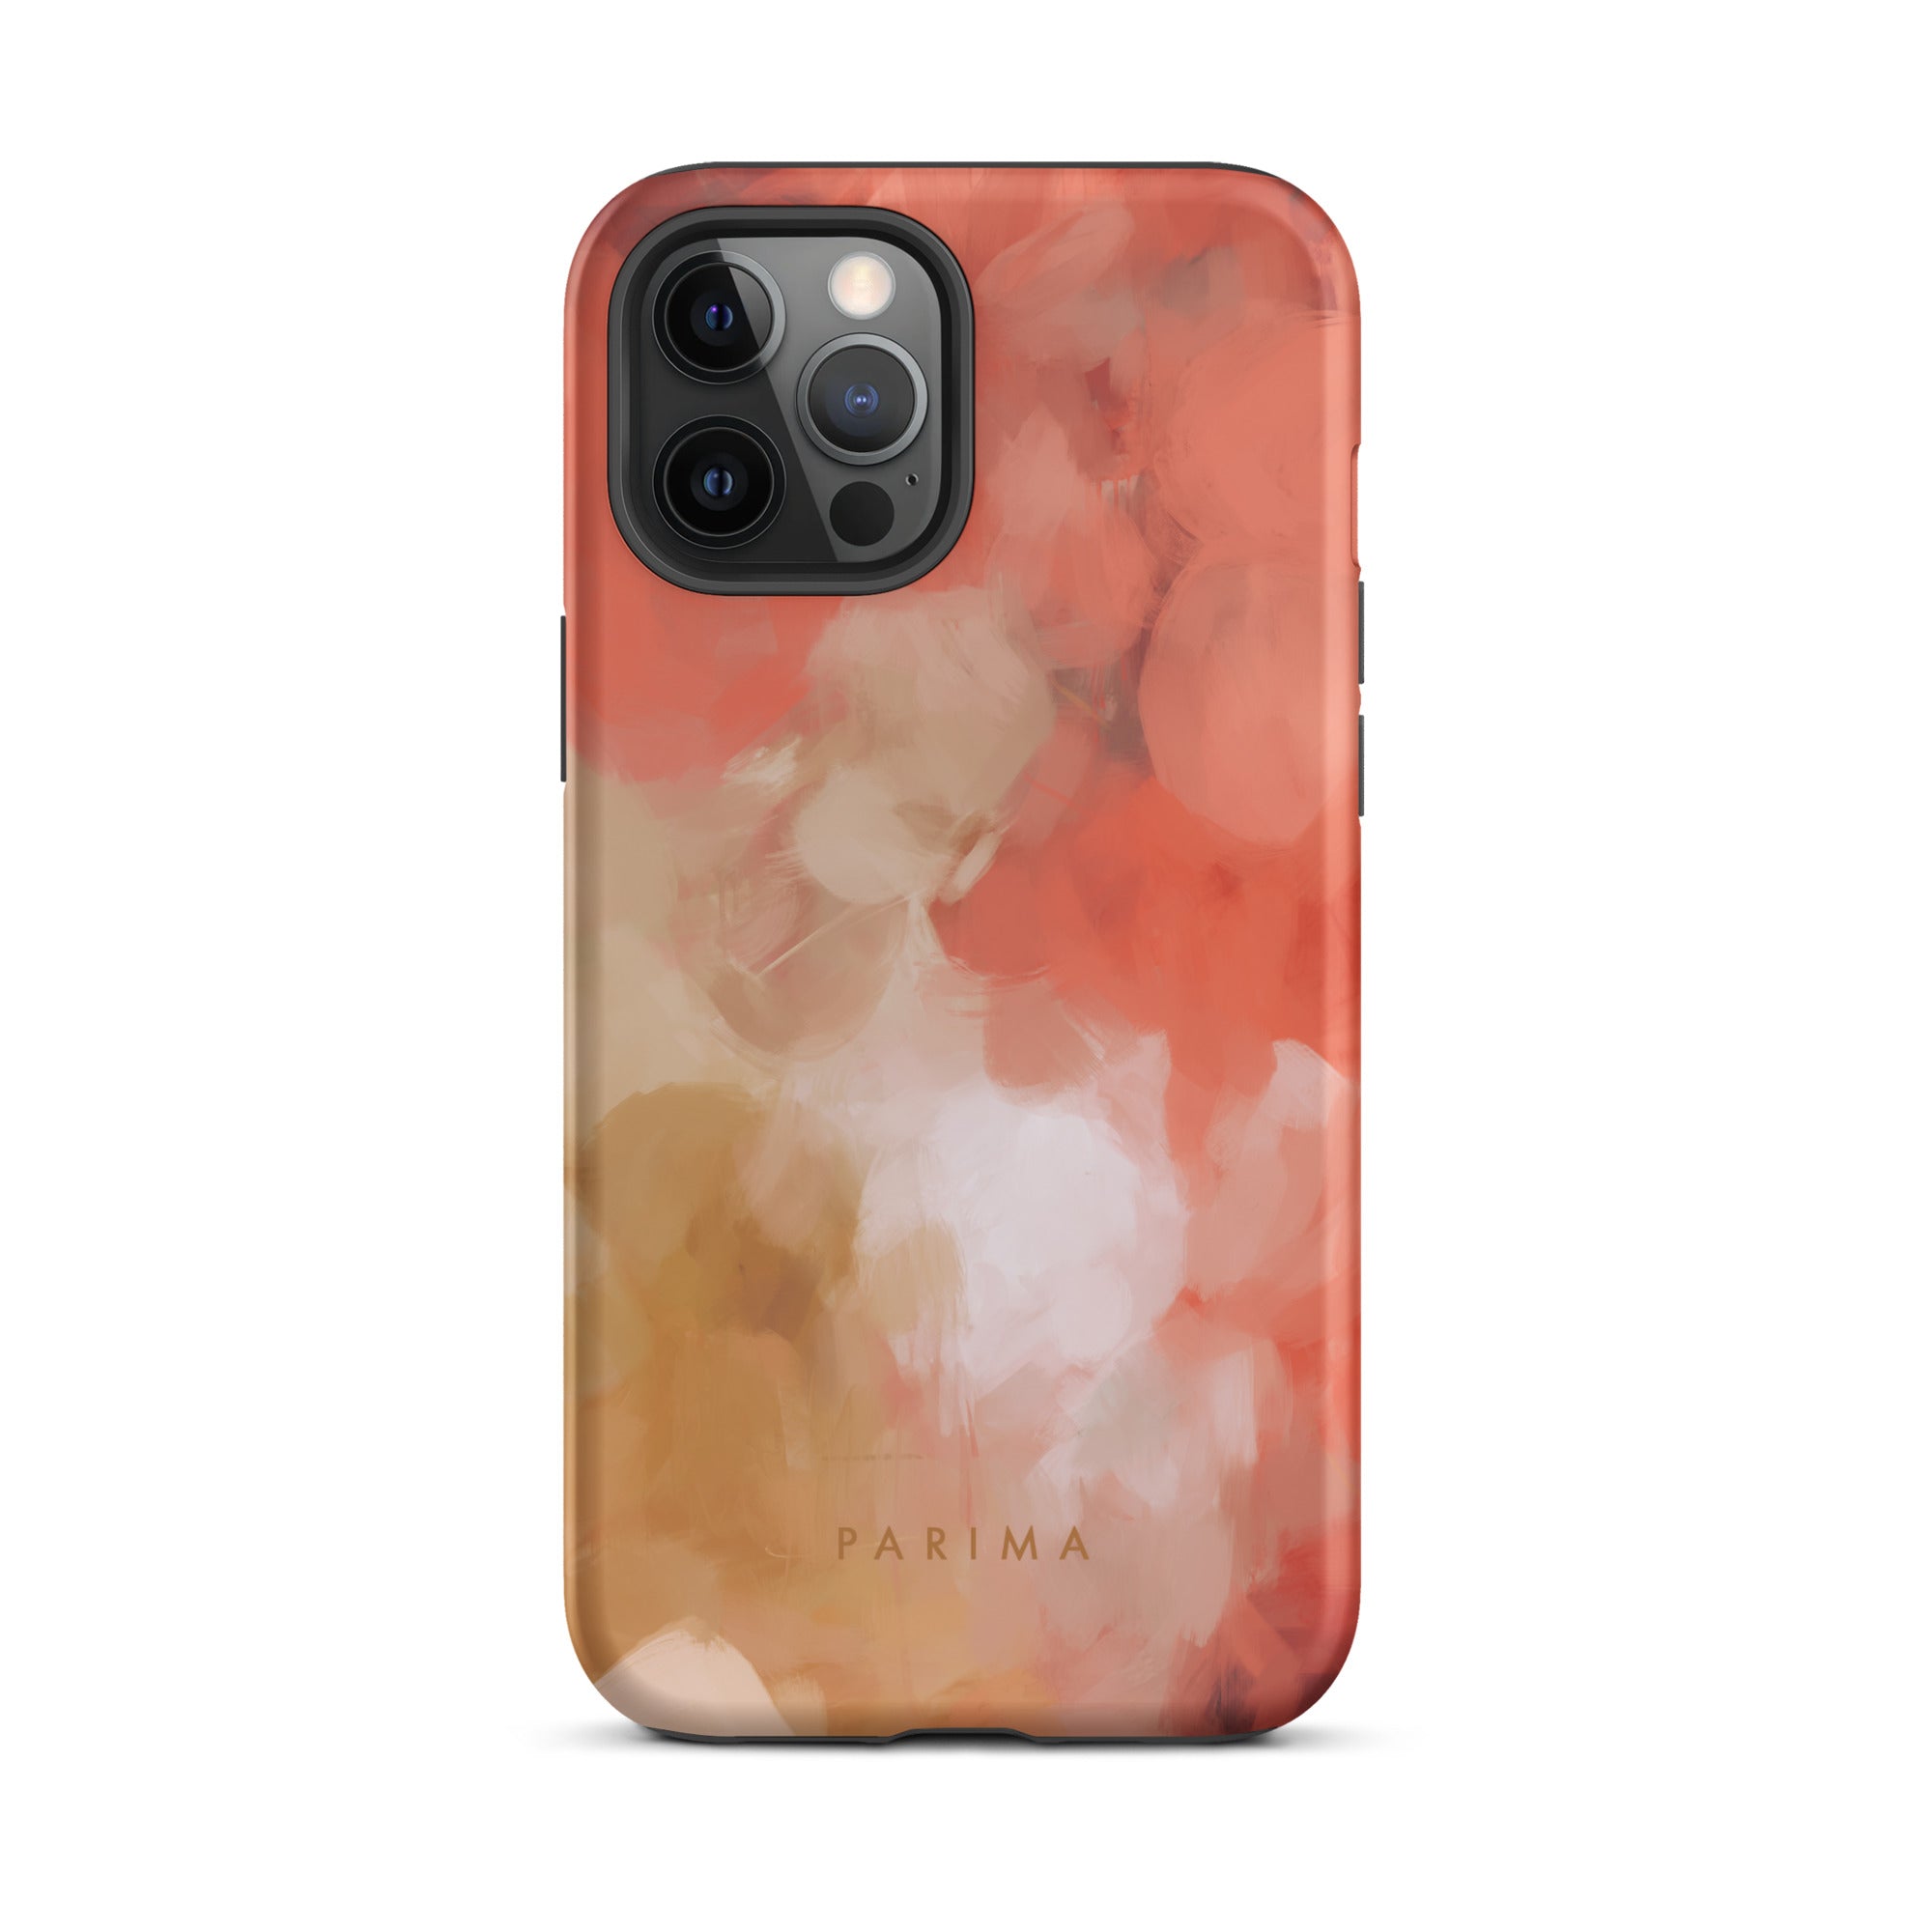 Begonia, pink and gold abstract art - iPhone 12 Pro Max tough case by Parima Studio